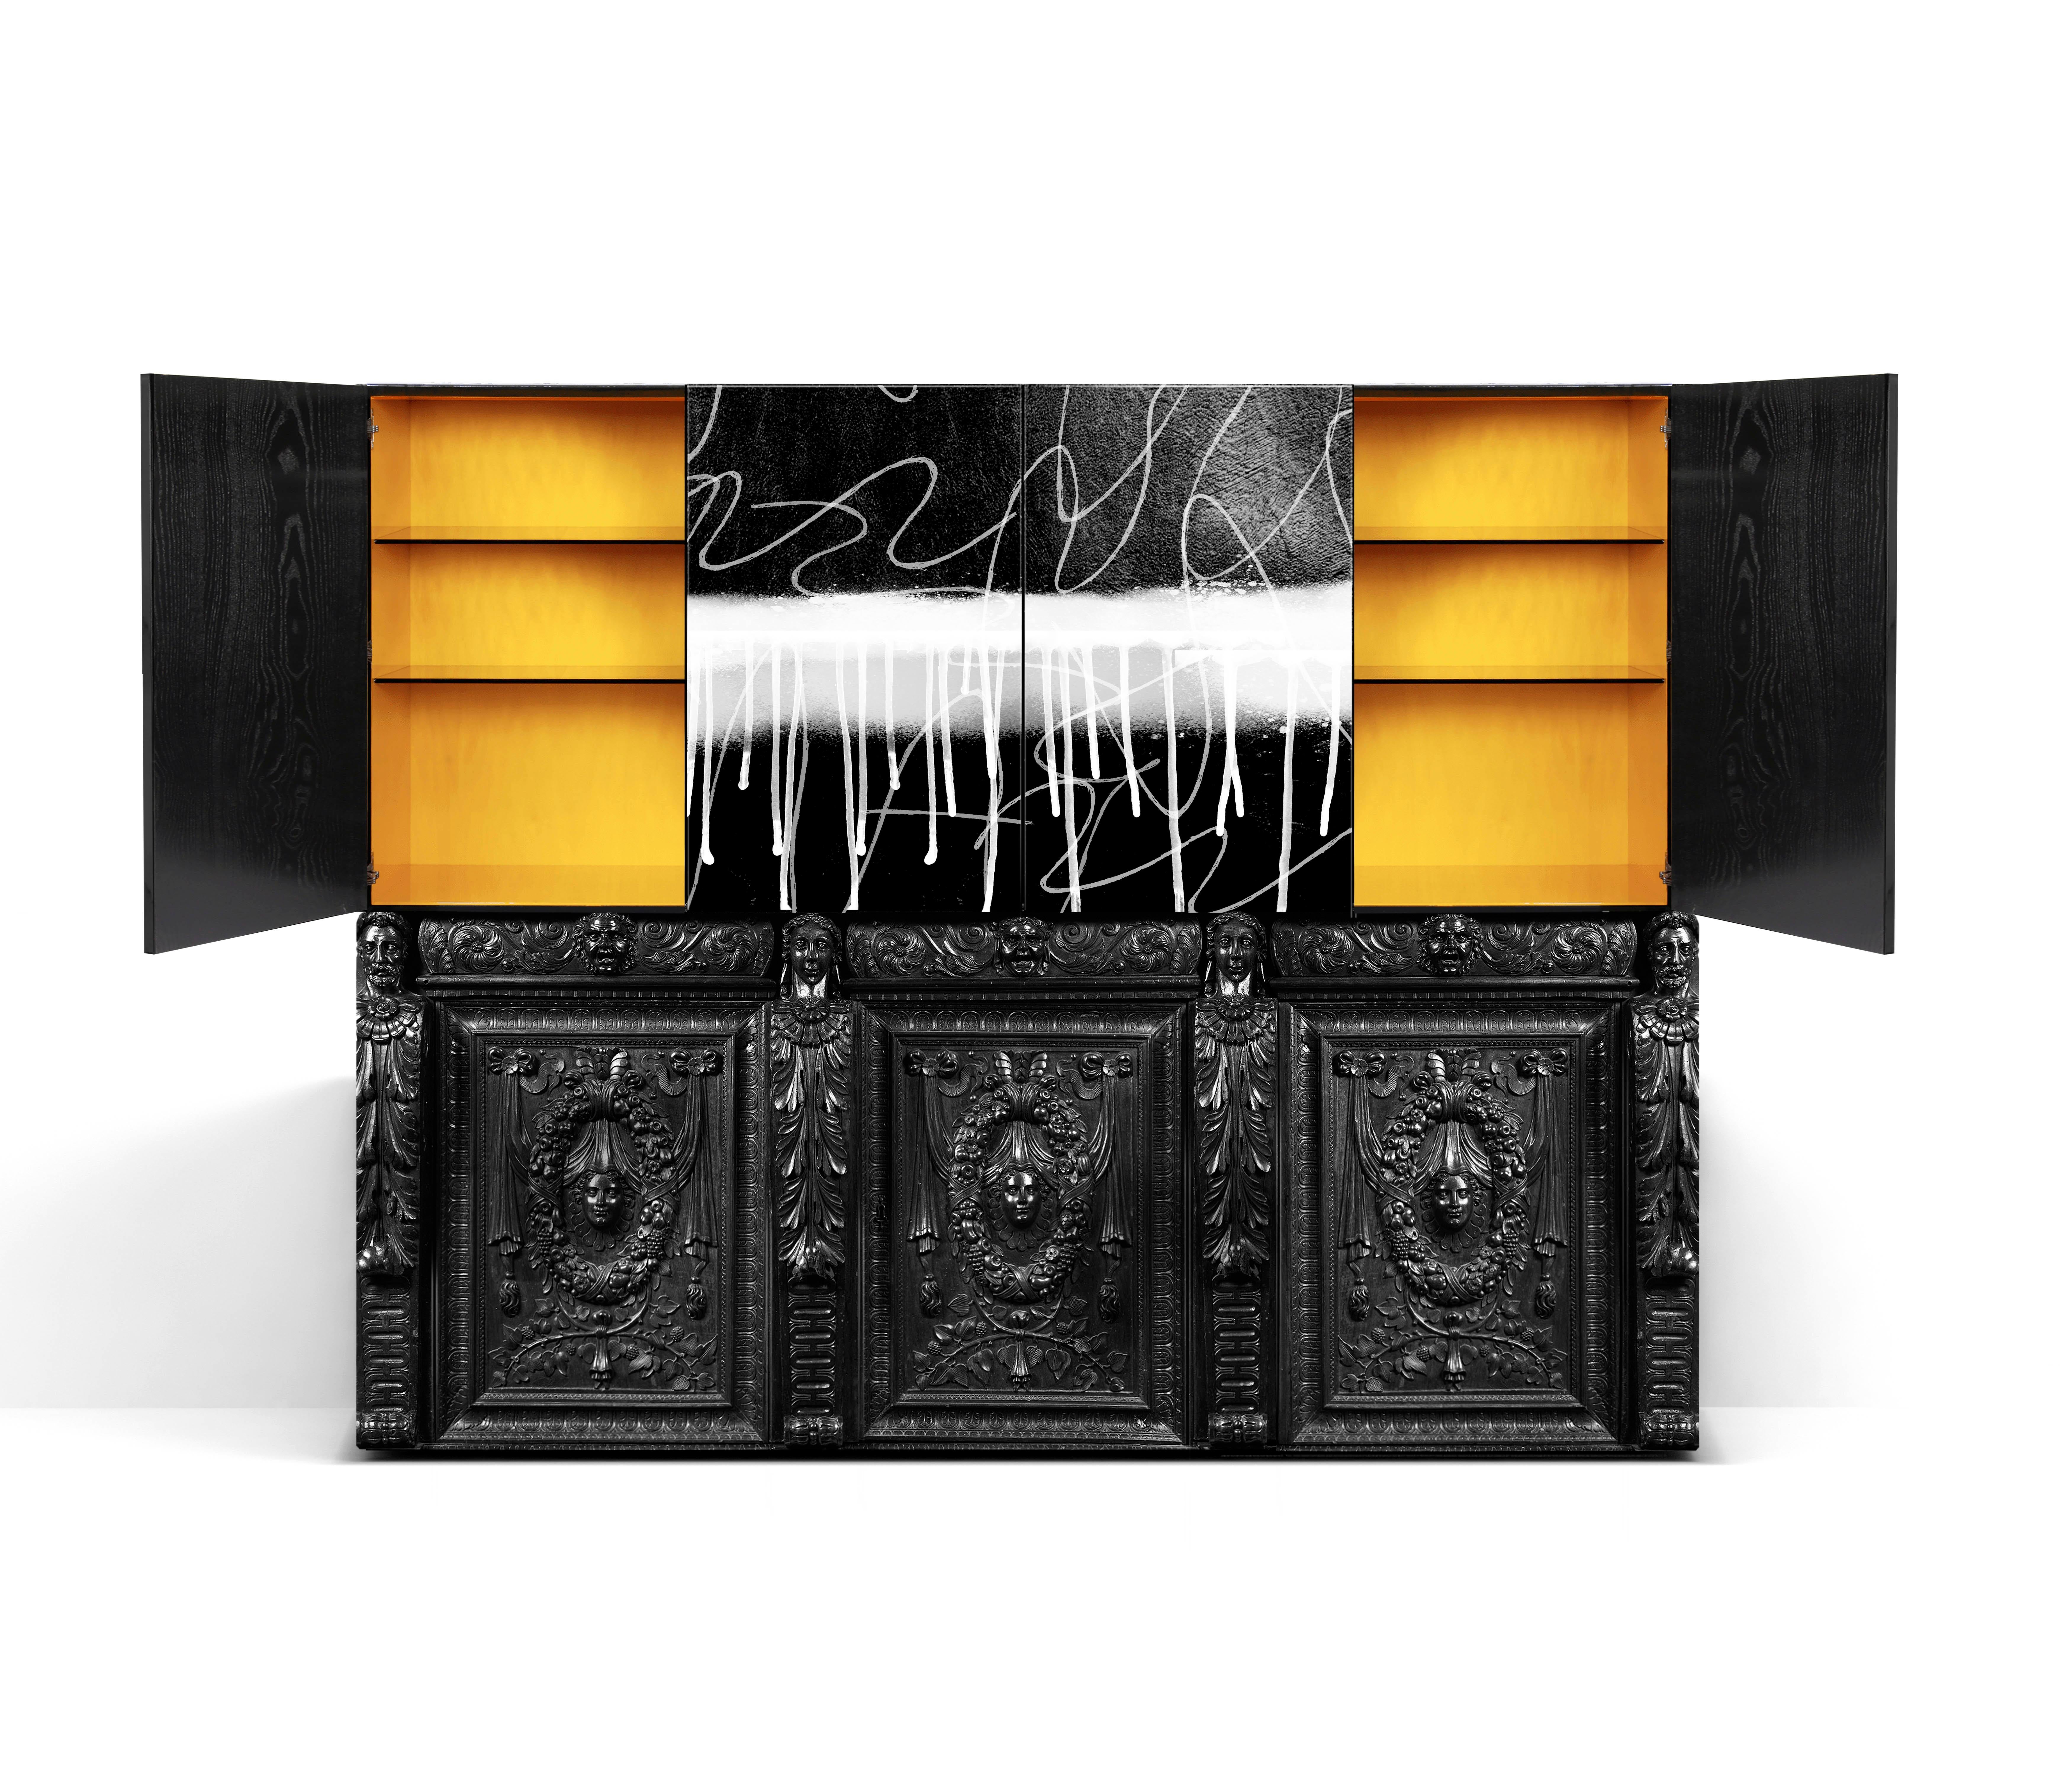 Abigail Sideboard and hutch 7 Door Cabinet is a stunning design, combining old and modern woodcraft. Perfect for those that have a love of fine detailing. Every inch a statement of eternal charm. Truly combining superb style along with an excellent